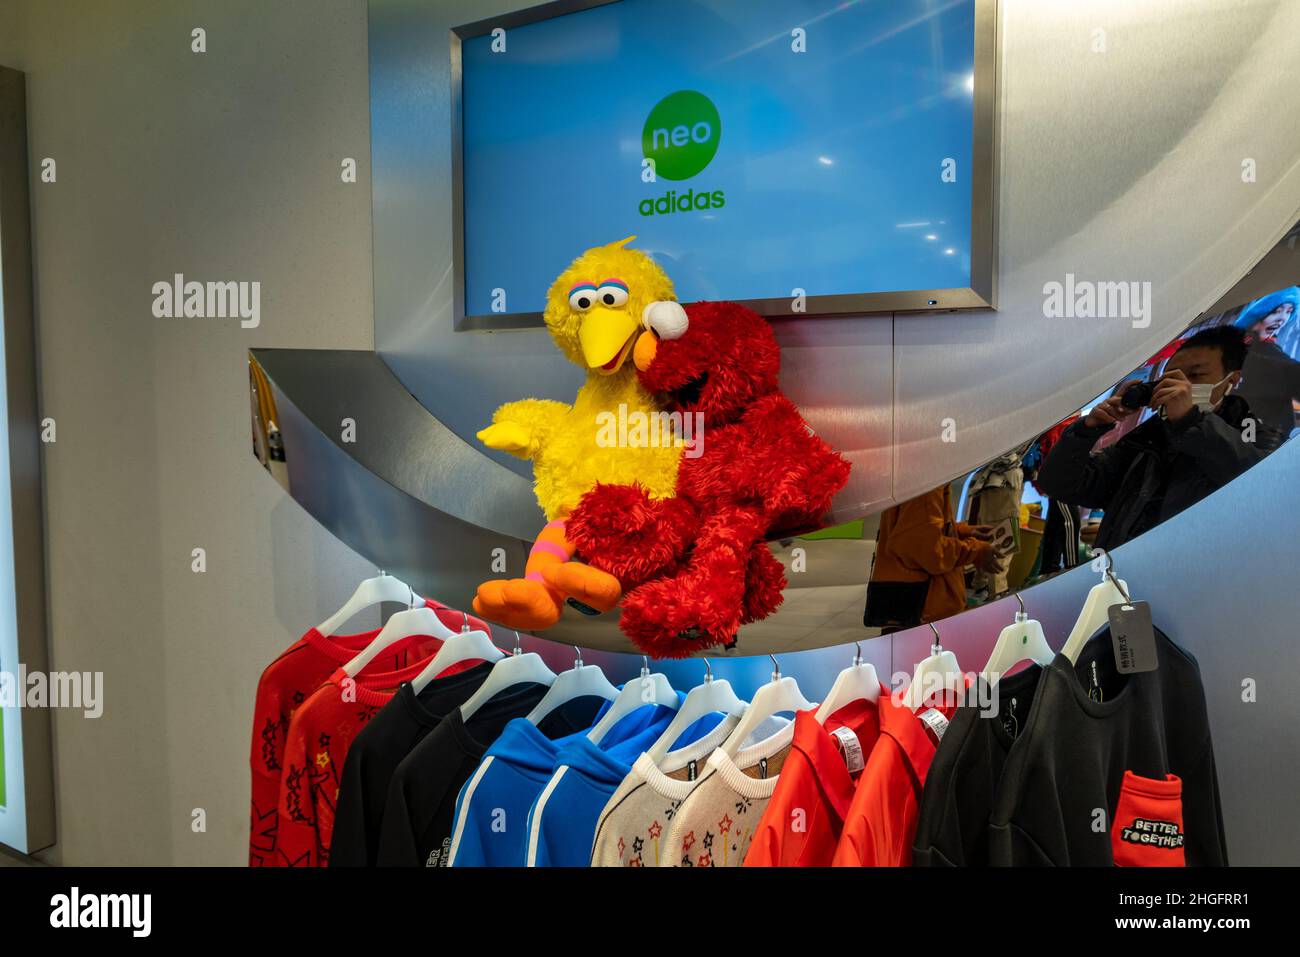 SHANGHAI, CHINA - JANUARY 20, 2022 - A view of adidas Neo's trendy new  store in collaboration with Sesame Street on January 20, 2022 in Shanghai,  Chin Stock Photo - Alamy